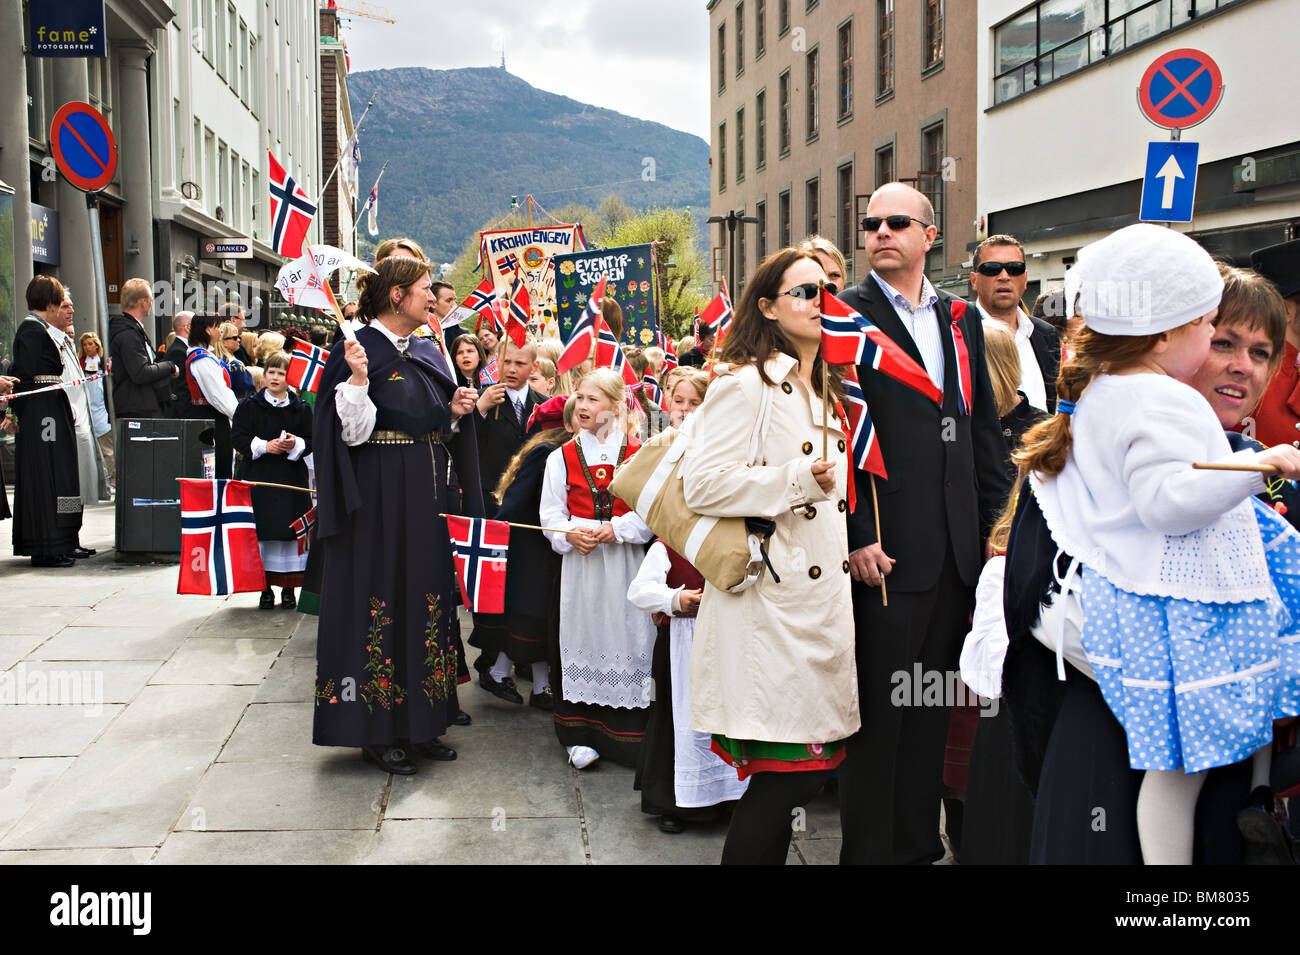 Local Clubs Bands Groups Families Schools March Through Bergen City Centre In Celebration of Norwegian Independence Day Stock Photo